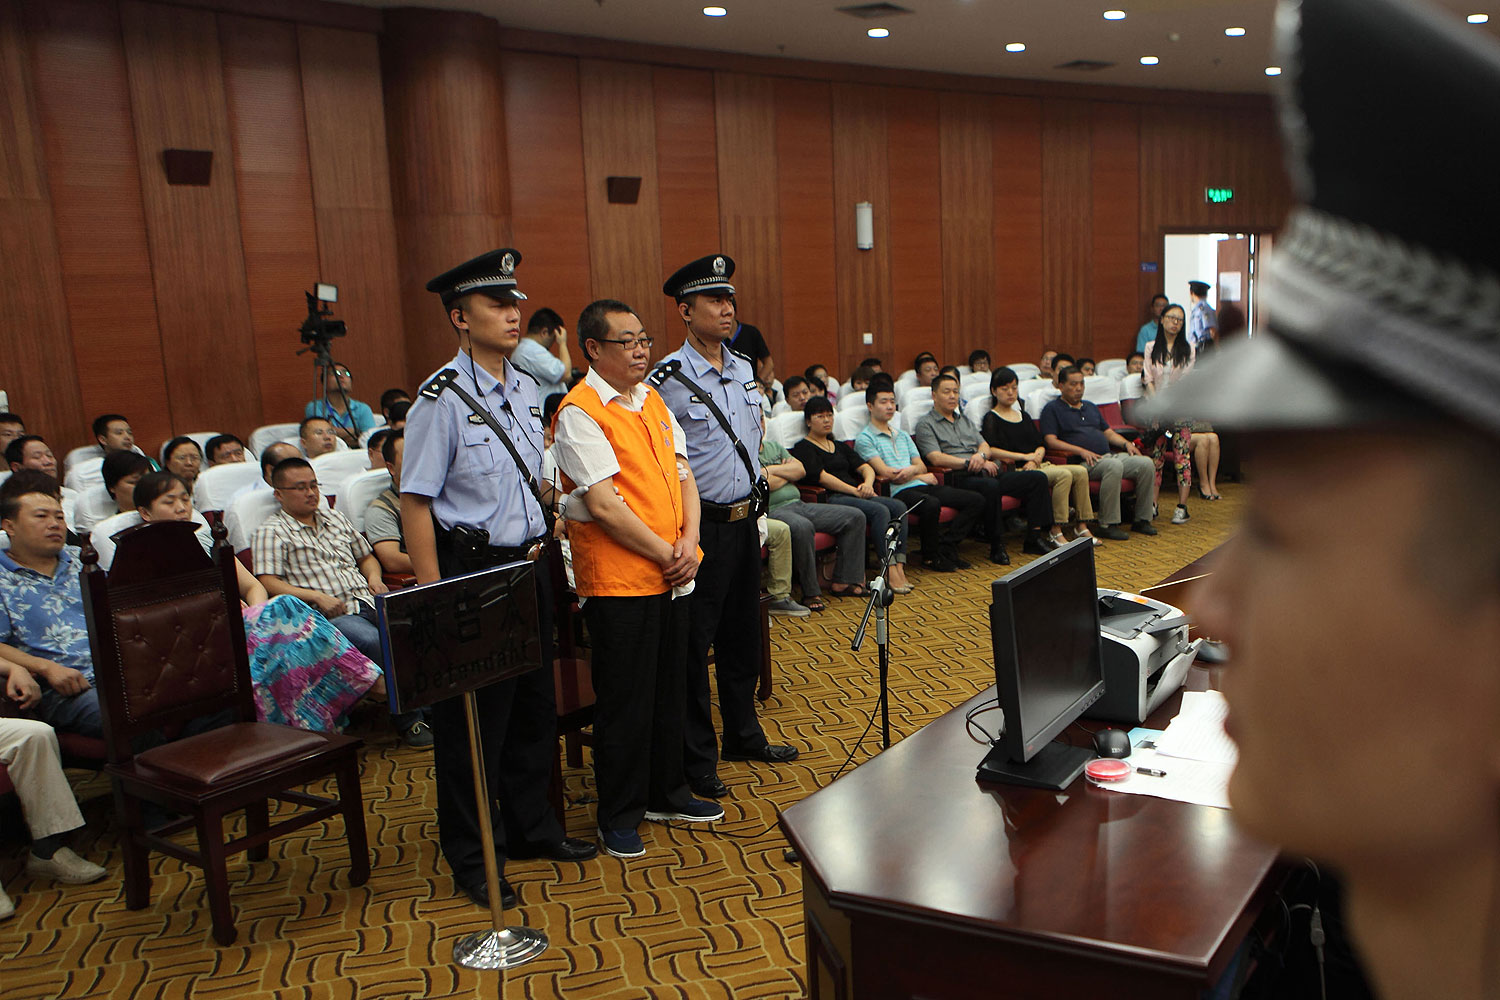 Yang Dacai (2nd L standing), a Chinese official branded 'Brother Watch' because of his expensive taste in timepieces, stands in the courtroom in the Intermediate people's court of Xian, northwest China's Shaanxi province on Sept. 5, 2013 (STR / AFP / Getty Images)